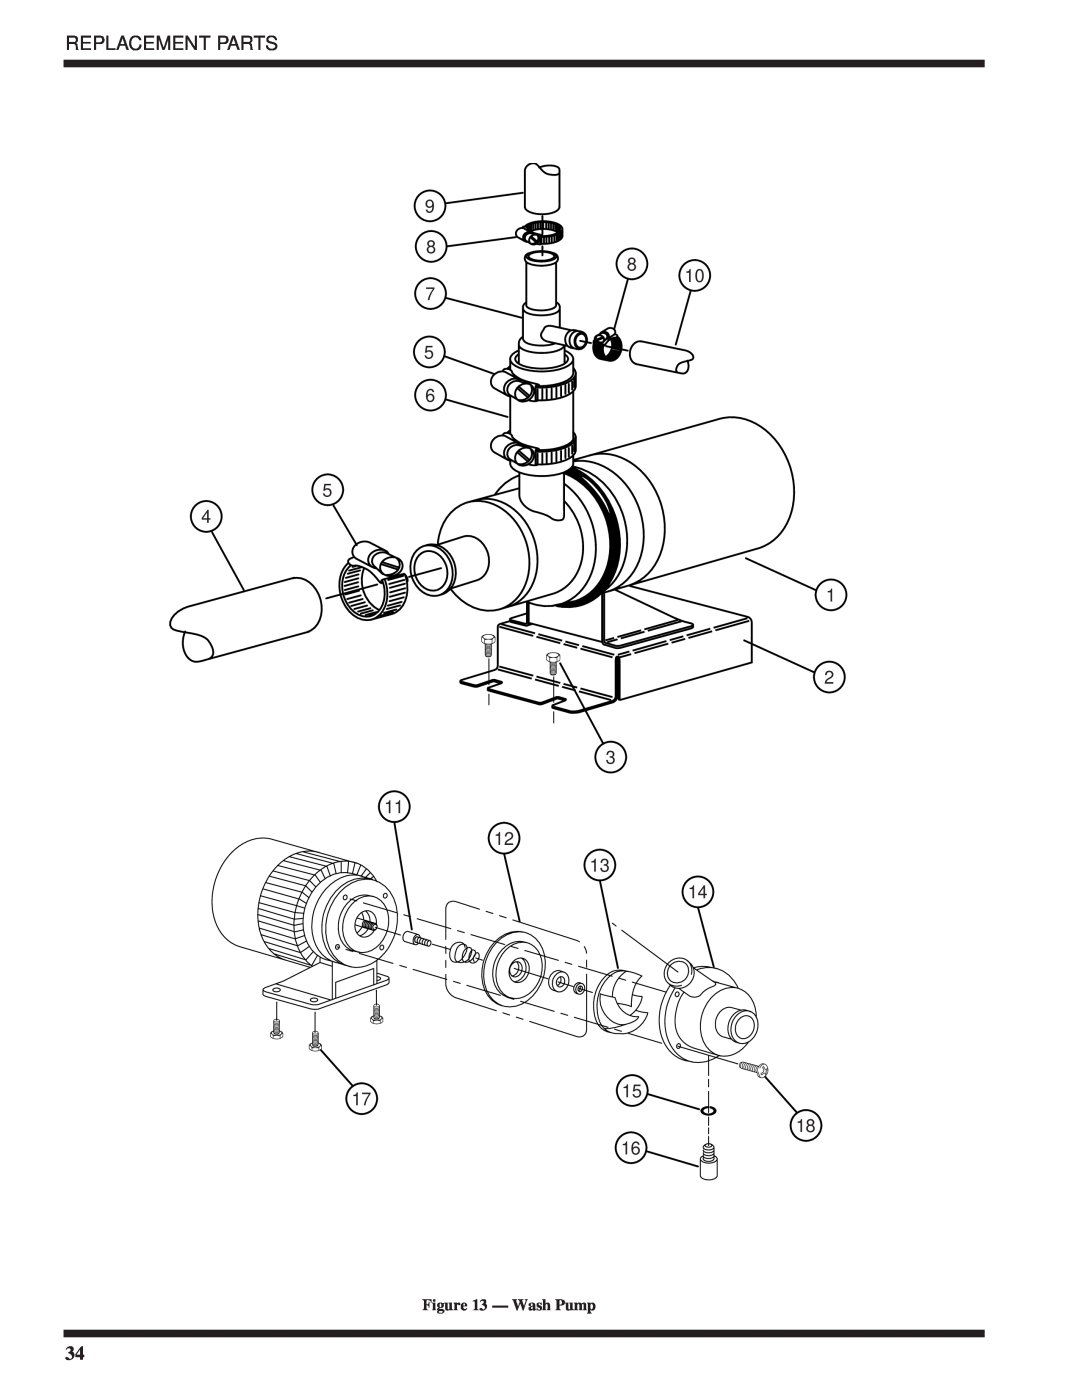 Moyer Diebel DF-M6, DF1-M6, DF2-M6 technical manual Replacement Parts, Wash Pump 